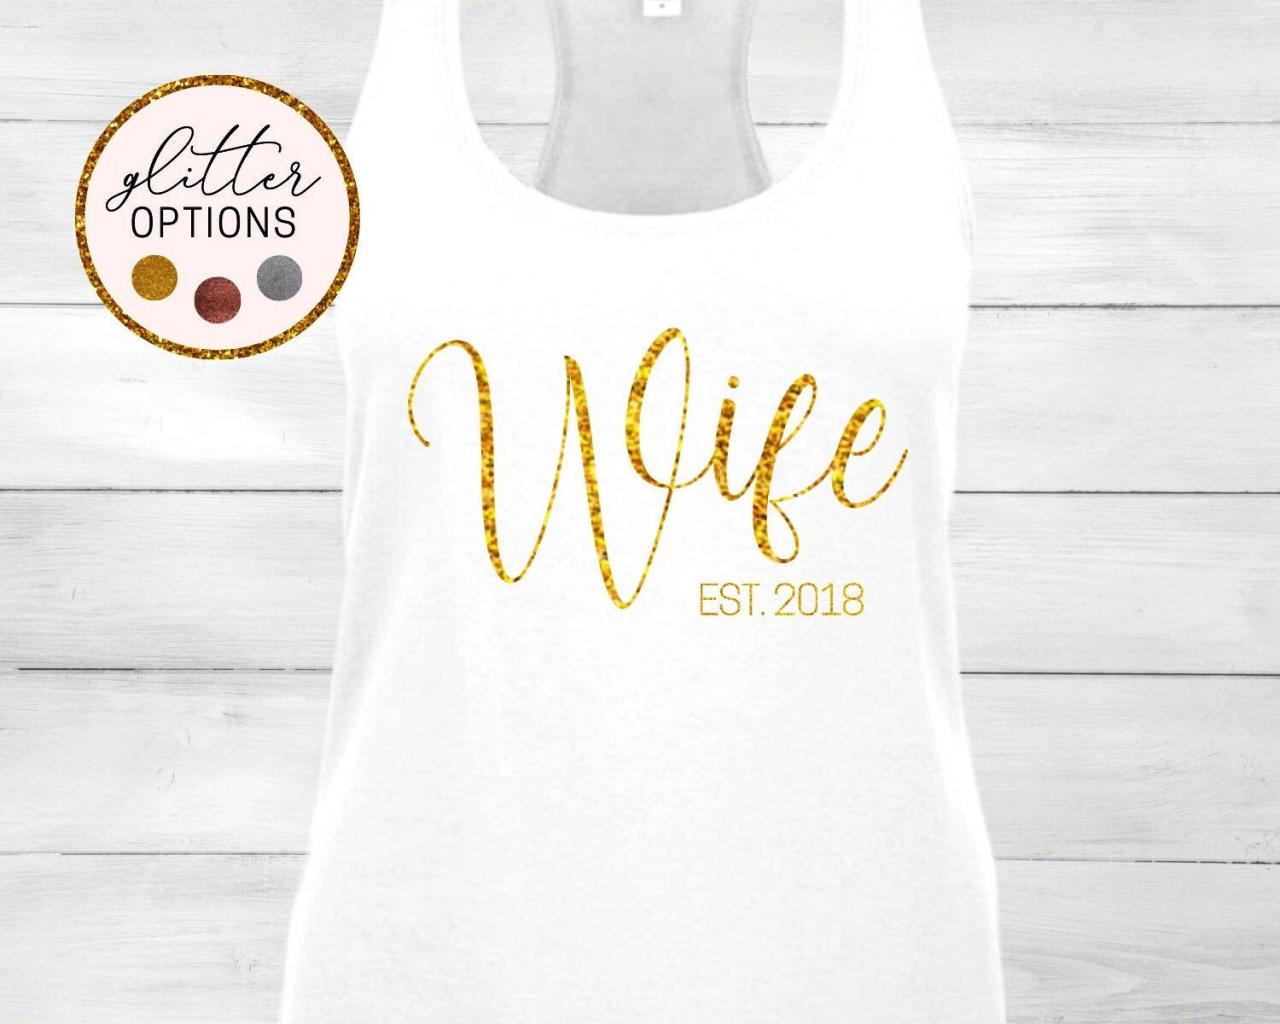 Personalized Wife Tank Top, Racerback, Custom Date, Newlyweds, Couples, Honeymoon, Just Married, Wedding Gift, Bridal Shower, Engagement